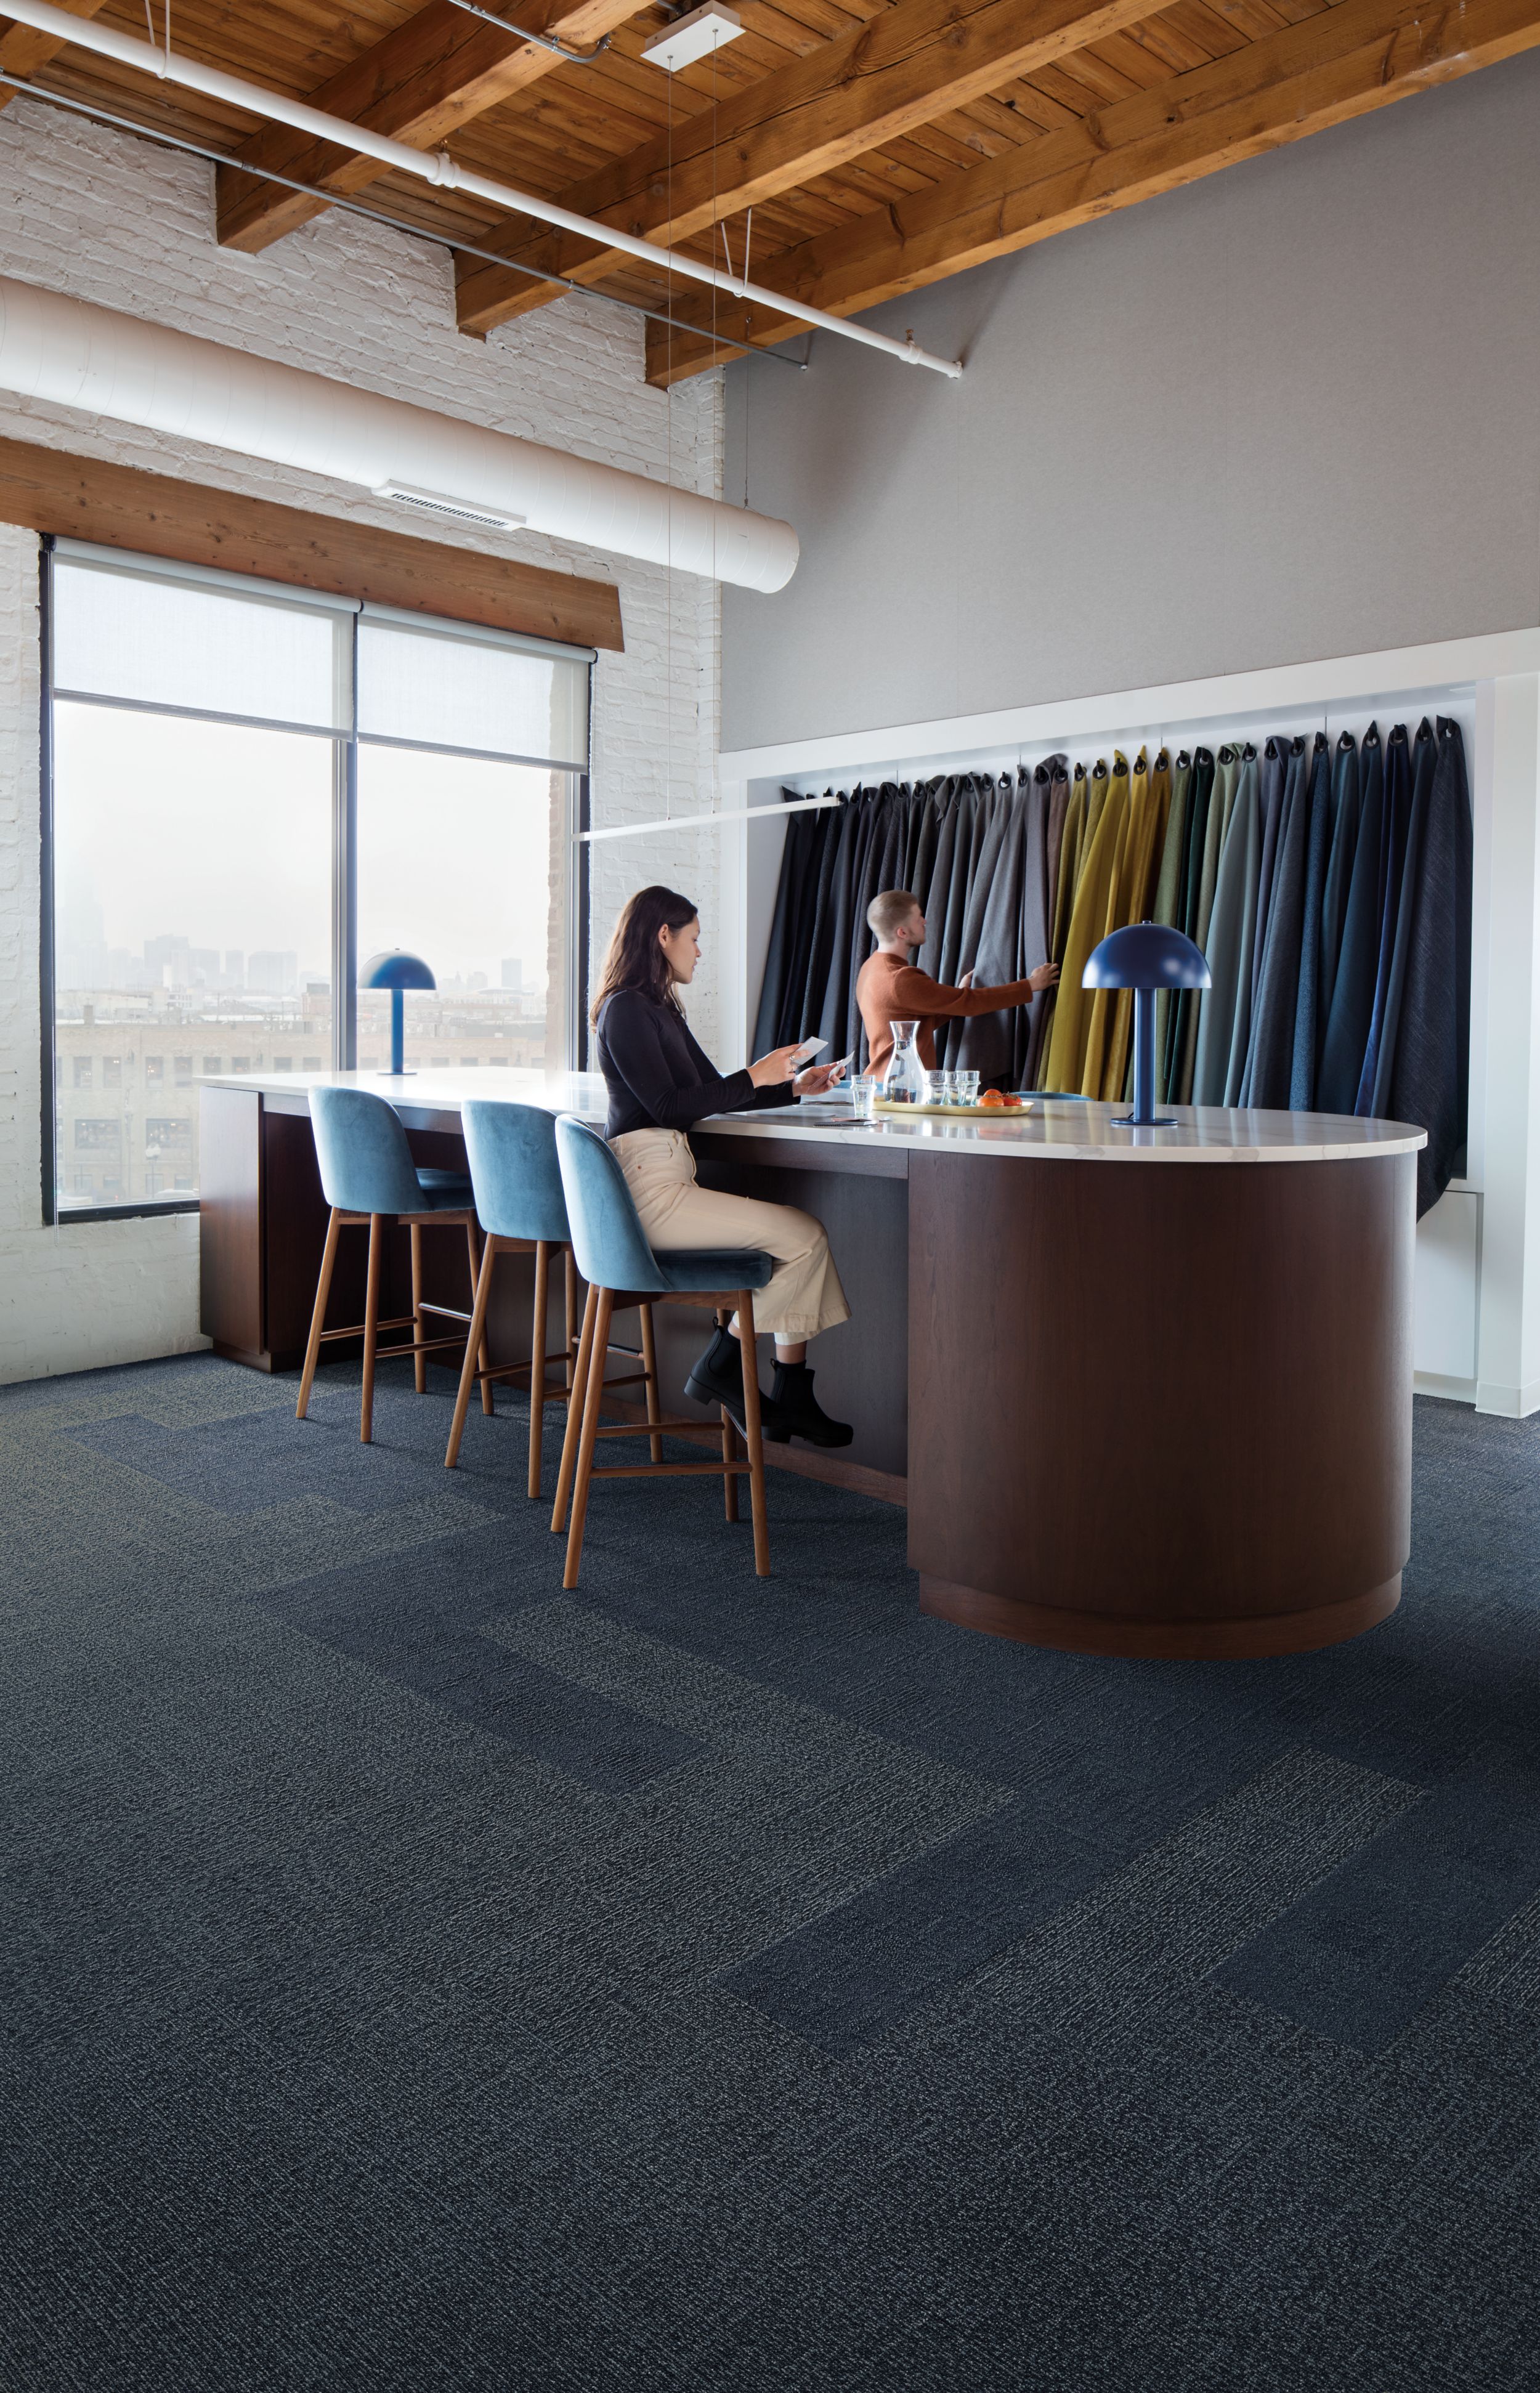 Interface Shishu Stitch and Vintage Kimono plank carpet tile in workspace with bar height table and person sitting imagen número 6